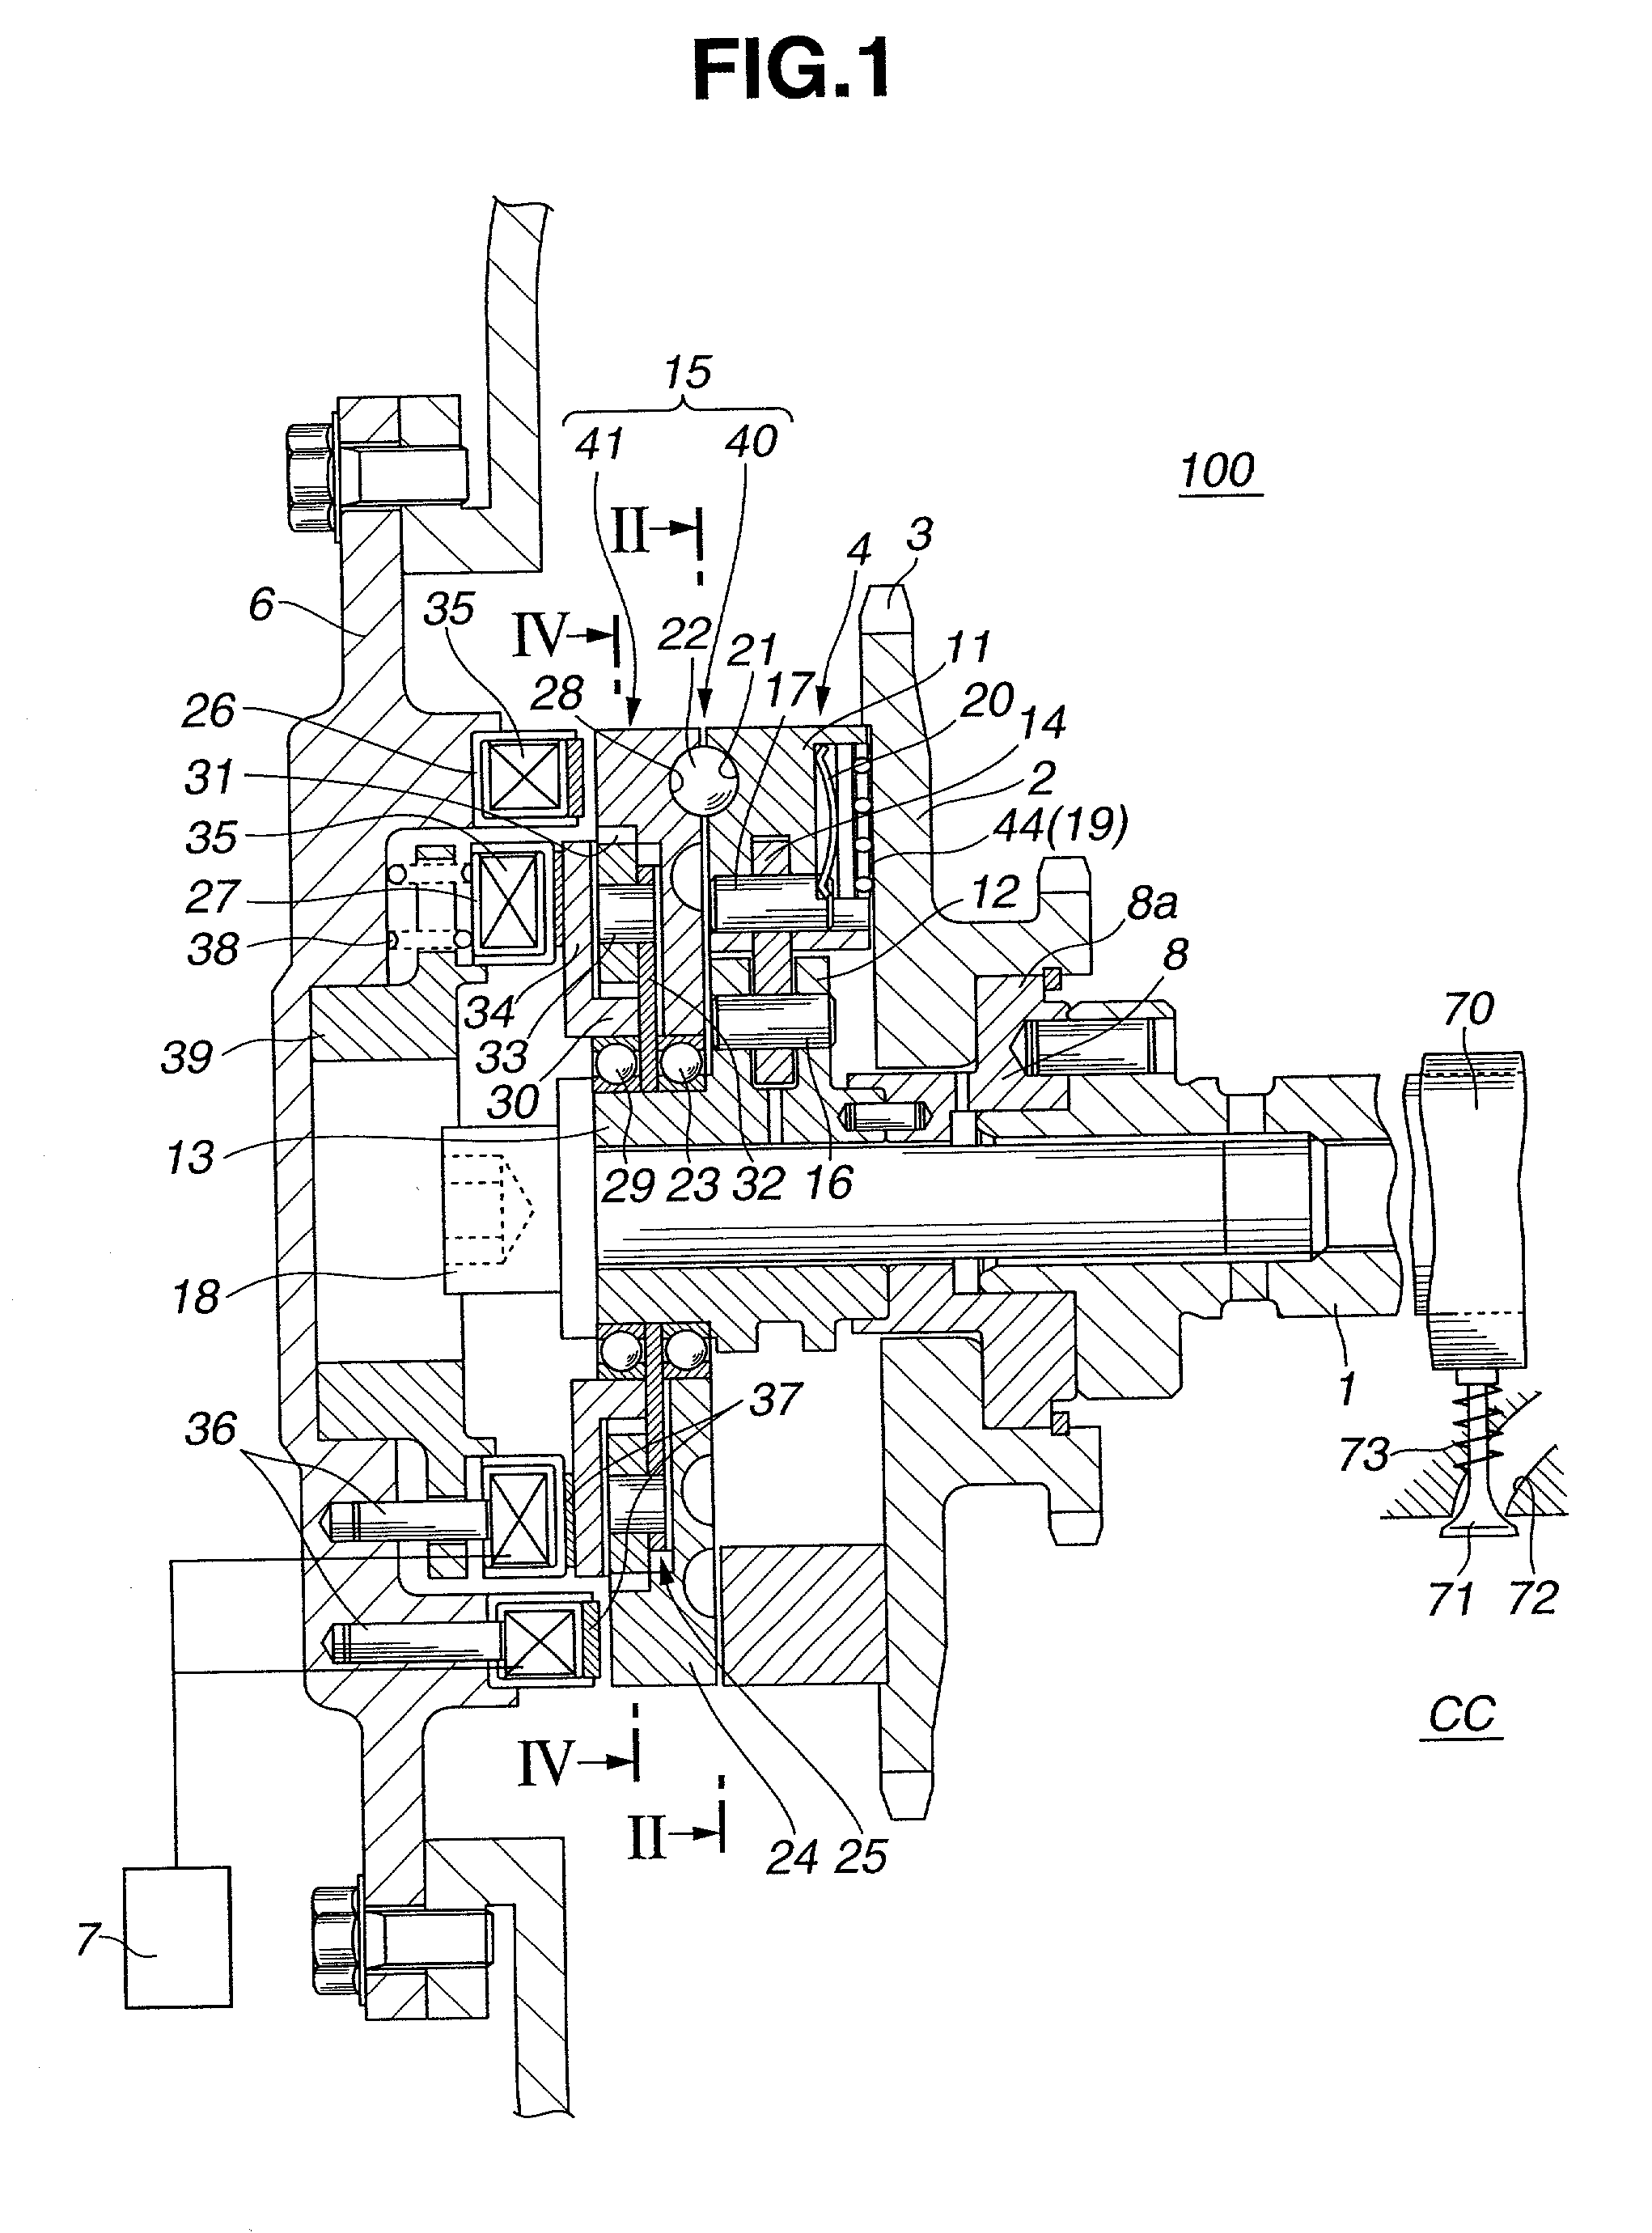 Valve timing control device fo internal combustion engine